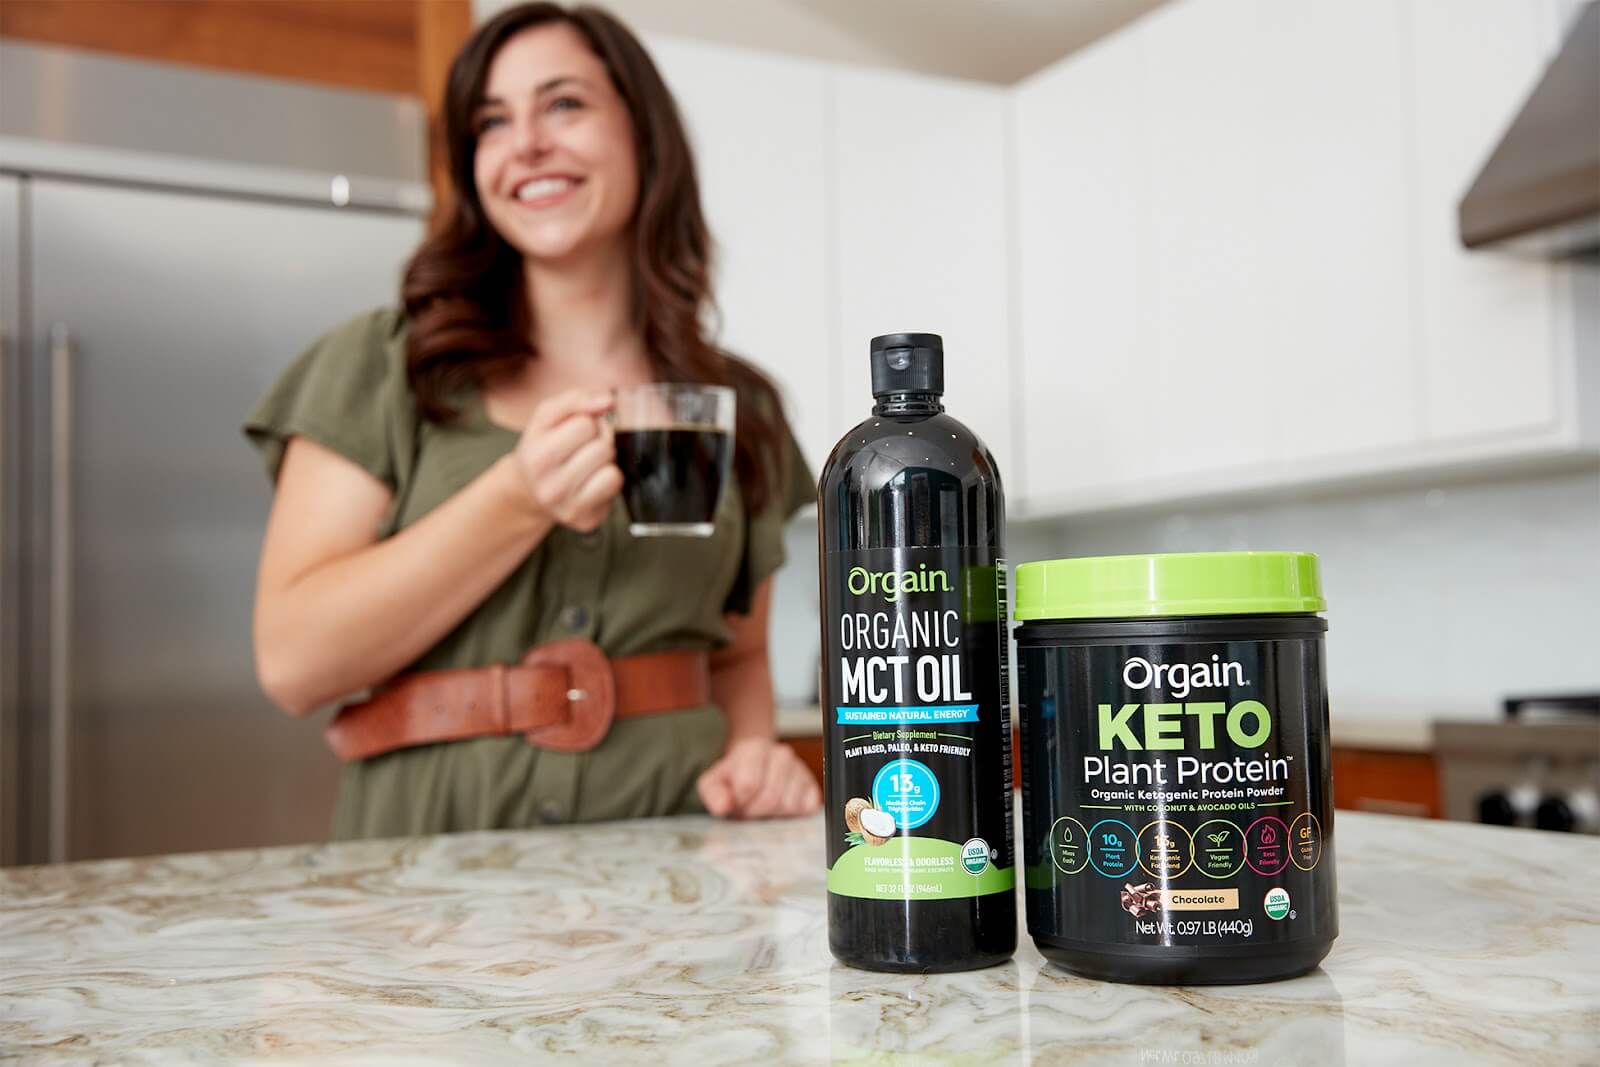 How Much Protein on Keto: 5 Common Mistakes People Make on a Keto Diet